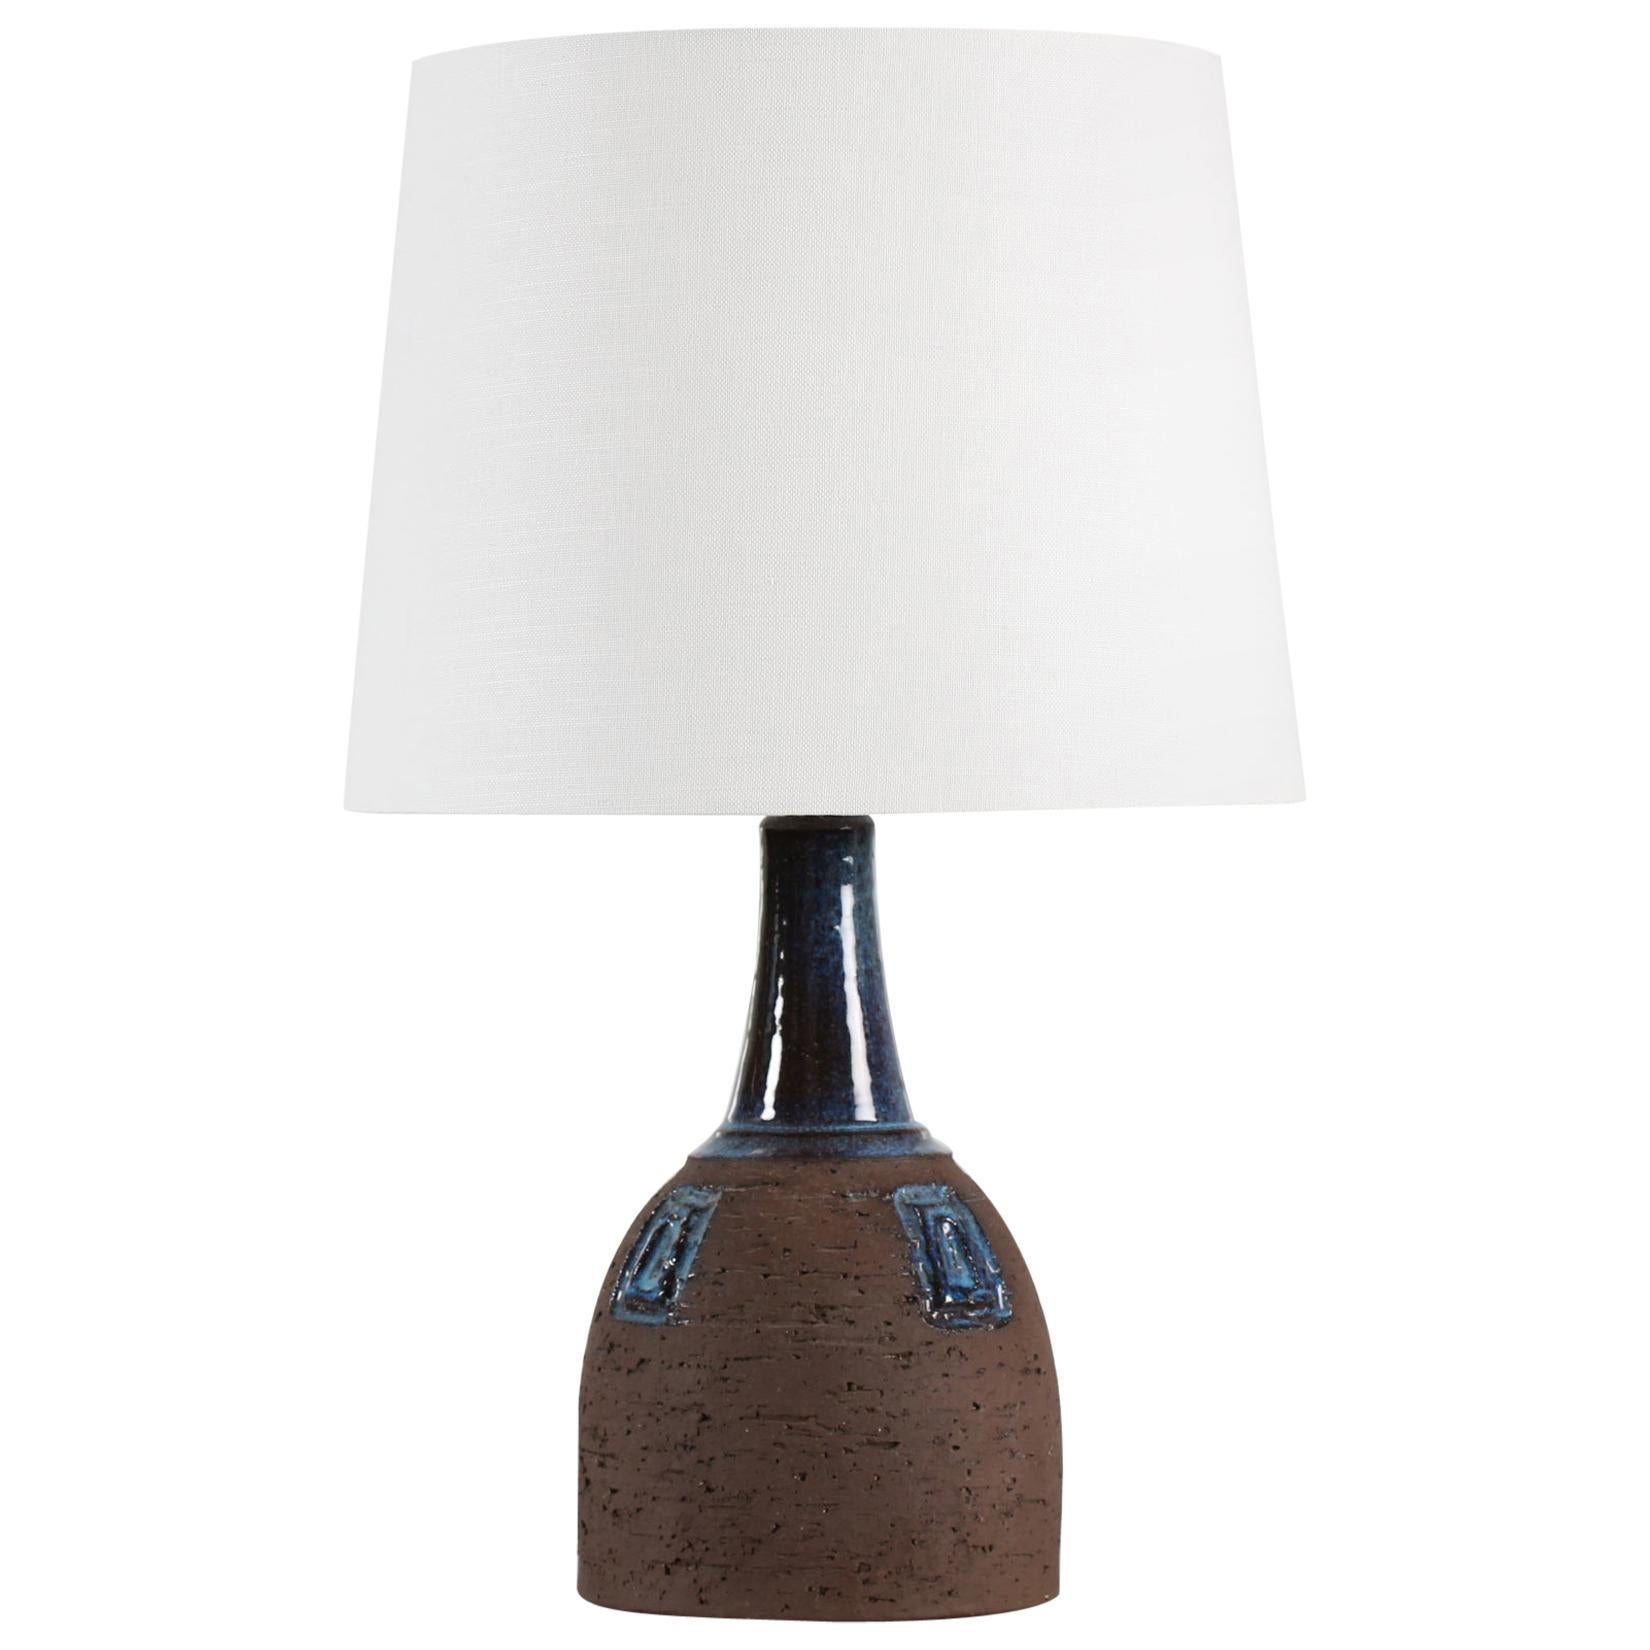 Brutalist Danish Brown and Blue Ceramic Table Lamp by Sejer Ceramic, 1970s For Sale